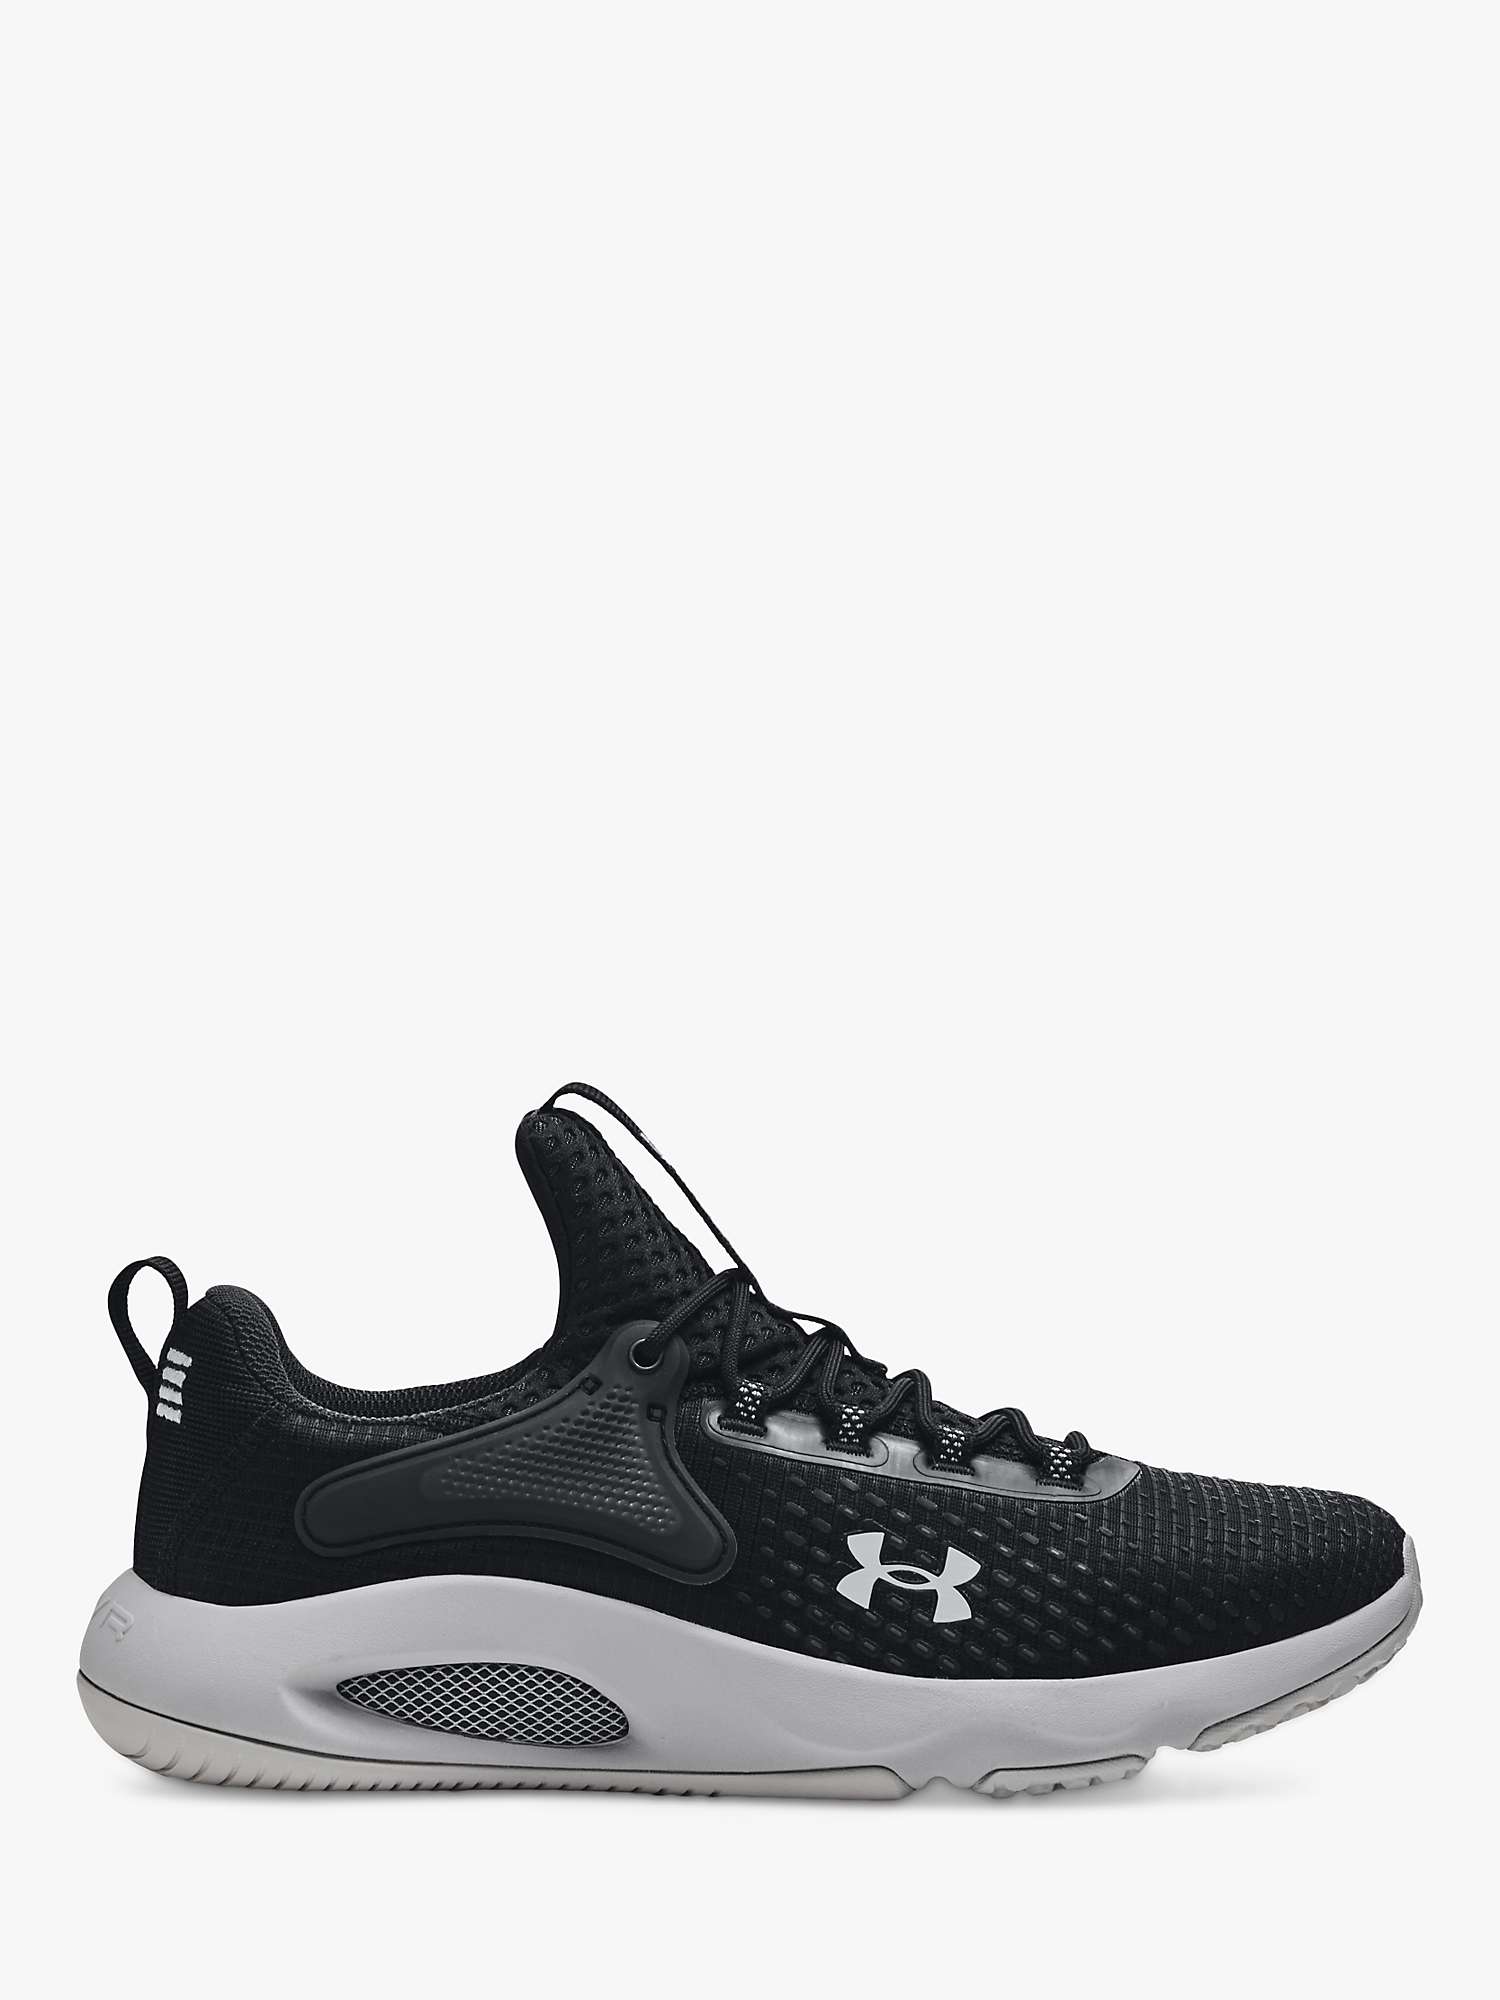 Buy Under Armour HOVR Rise 4 Men's Cross Trainers Online at johnlewis.com